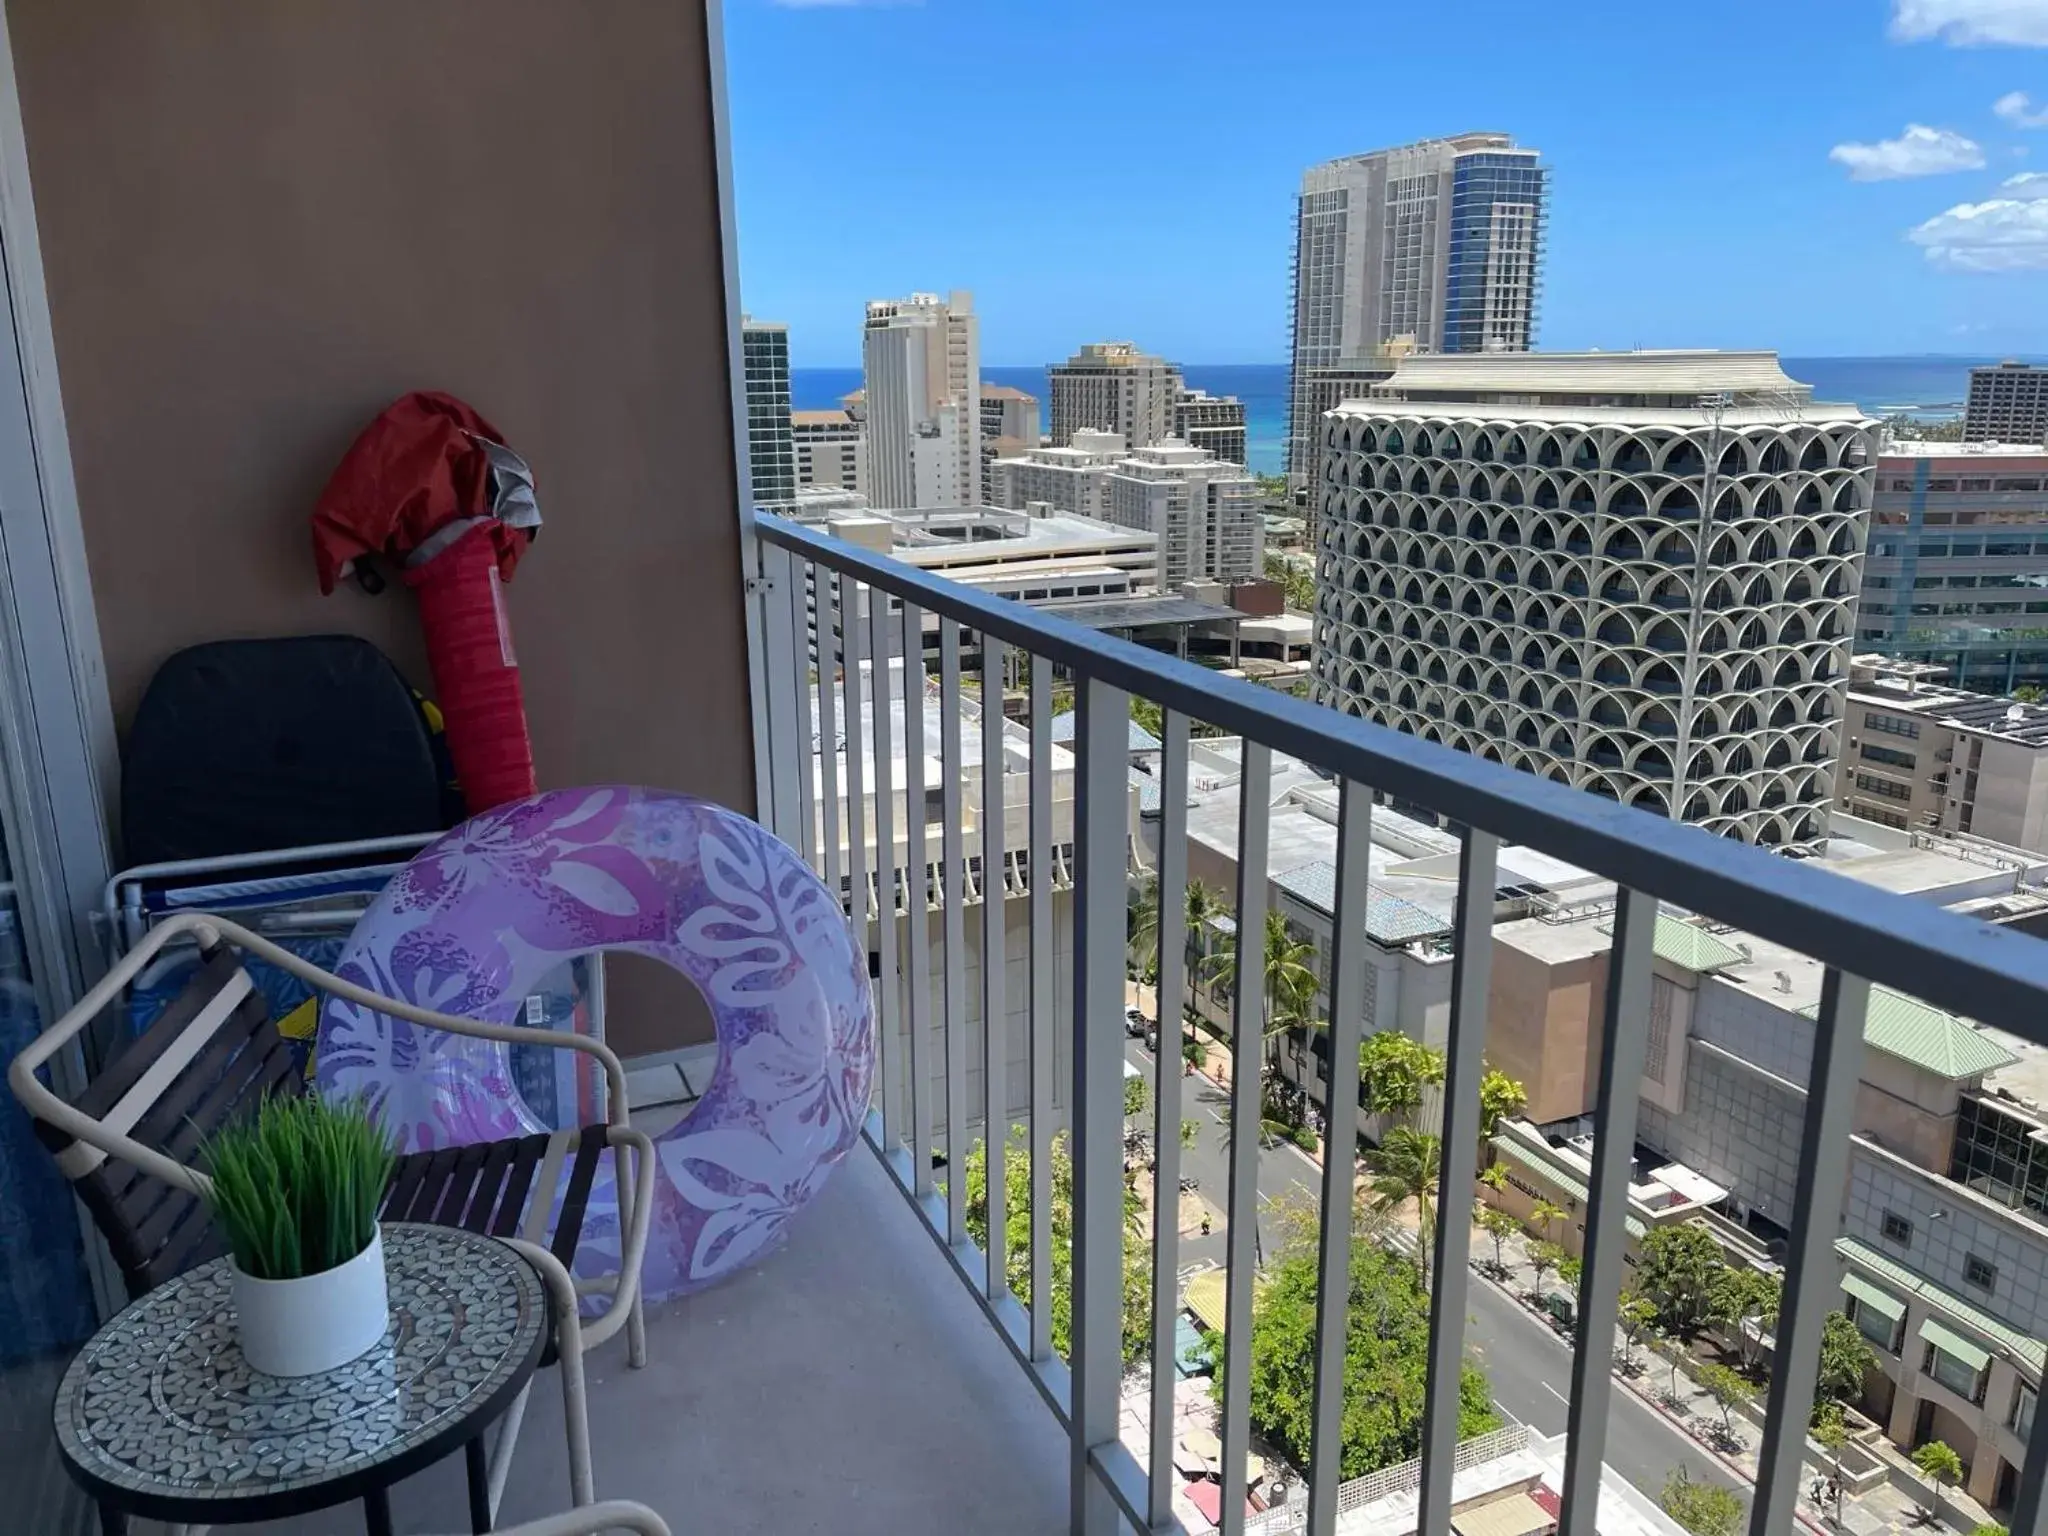 Balcony/Terrace in Tropical Studios at Marine Surf Waikiki - FREE PARKING - BEST LOCATION - FULL KITCHEN - SWIMMING POOL